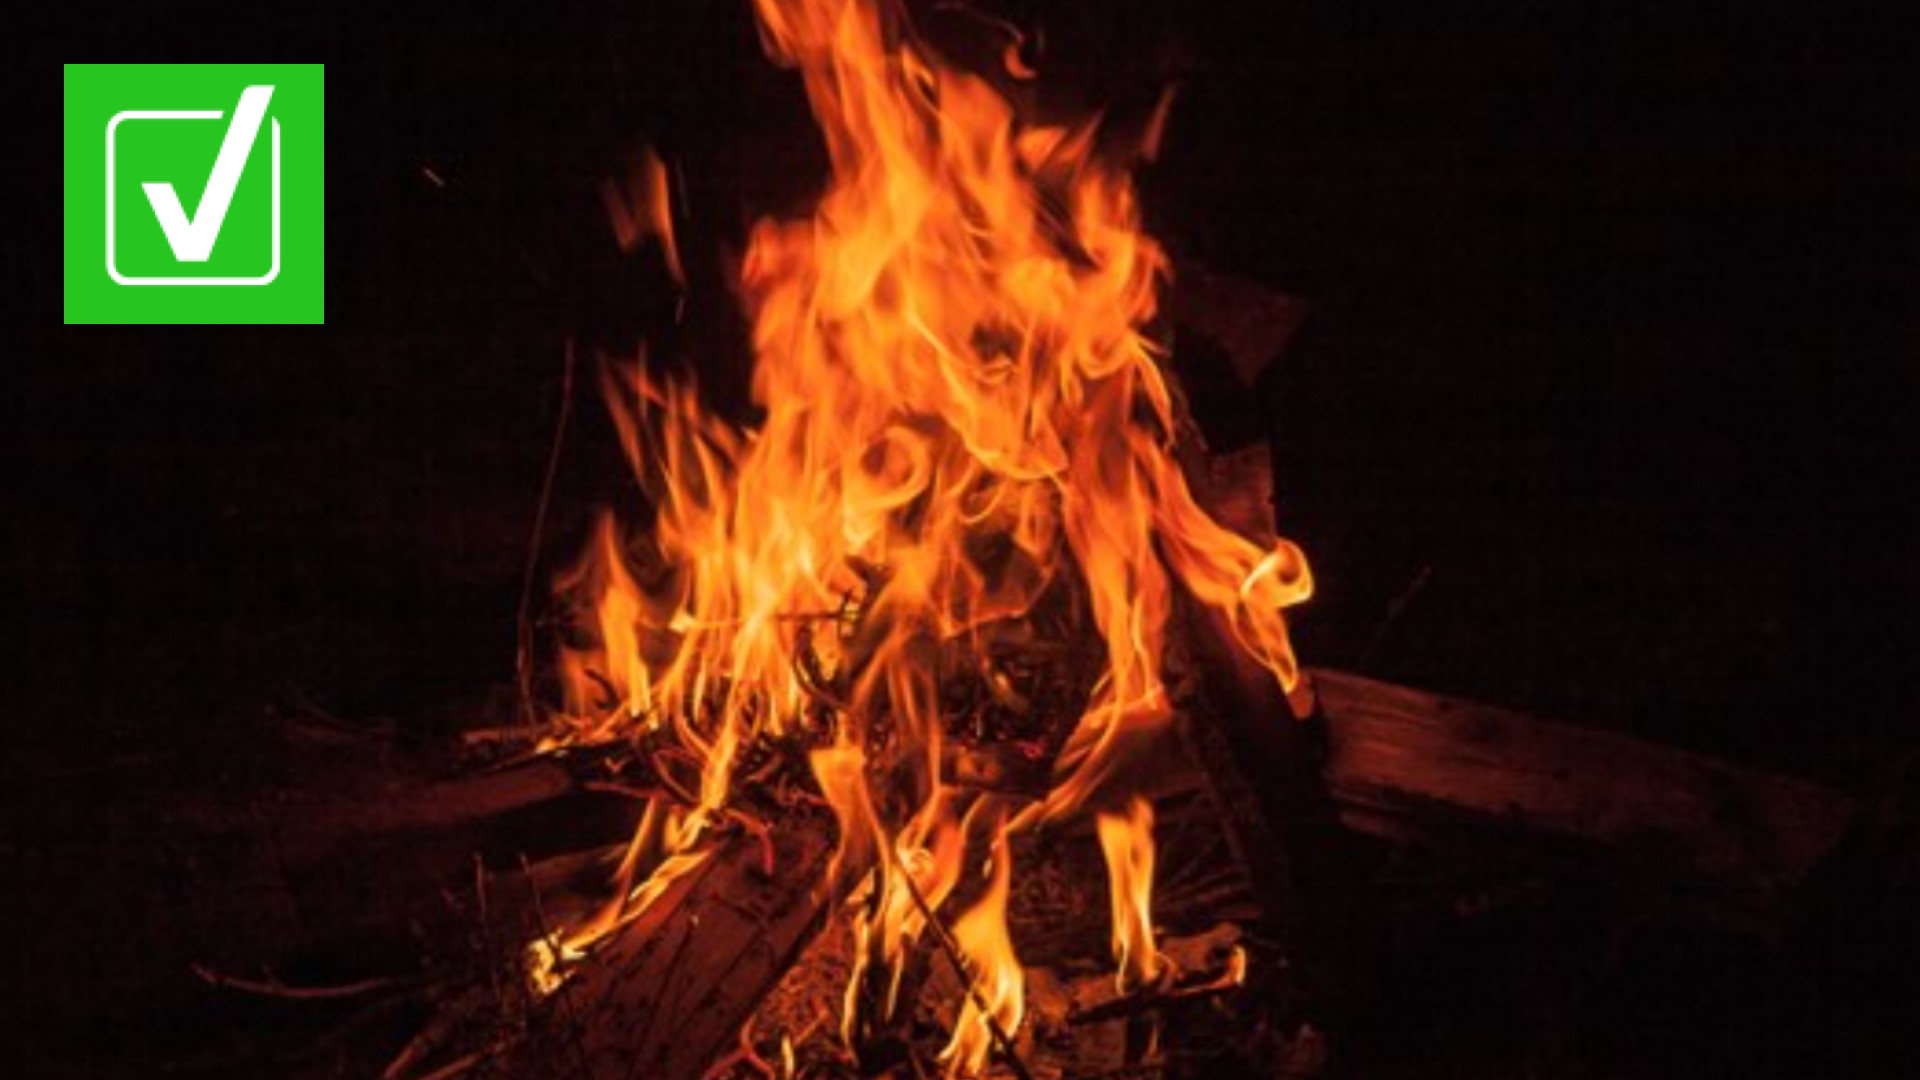 Yes, a valid Granite City Fire Department permit is required before residents can set recreational fires or bonfires.